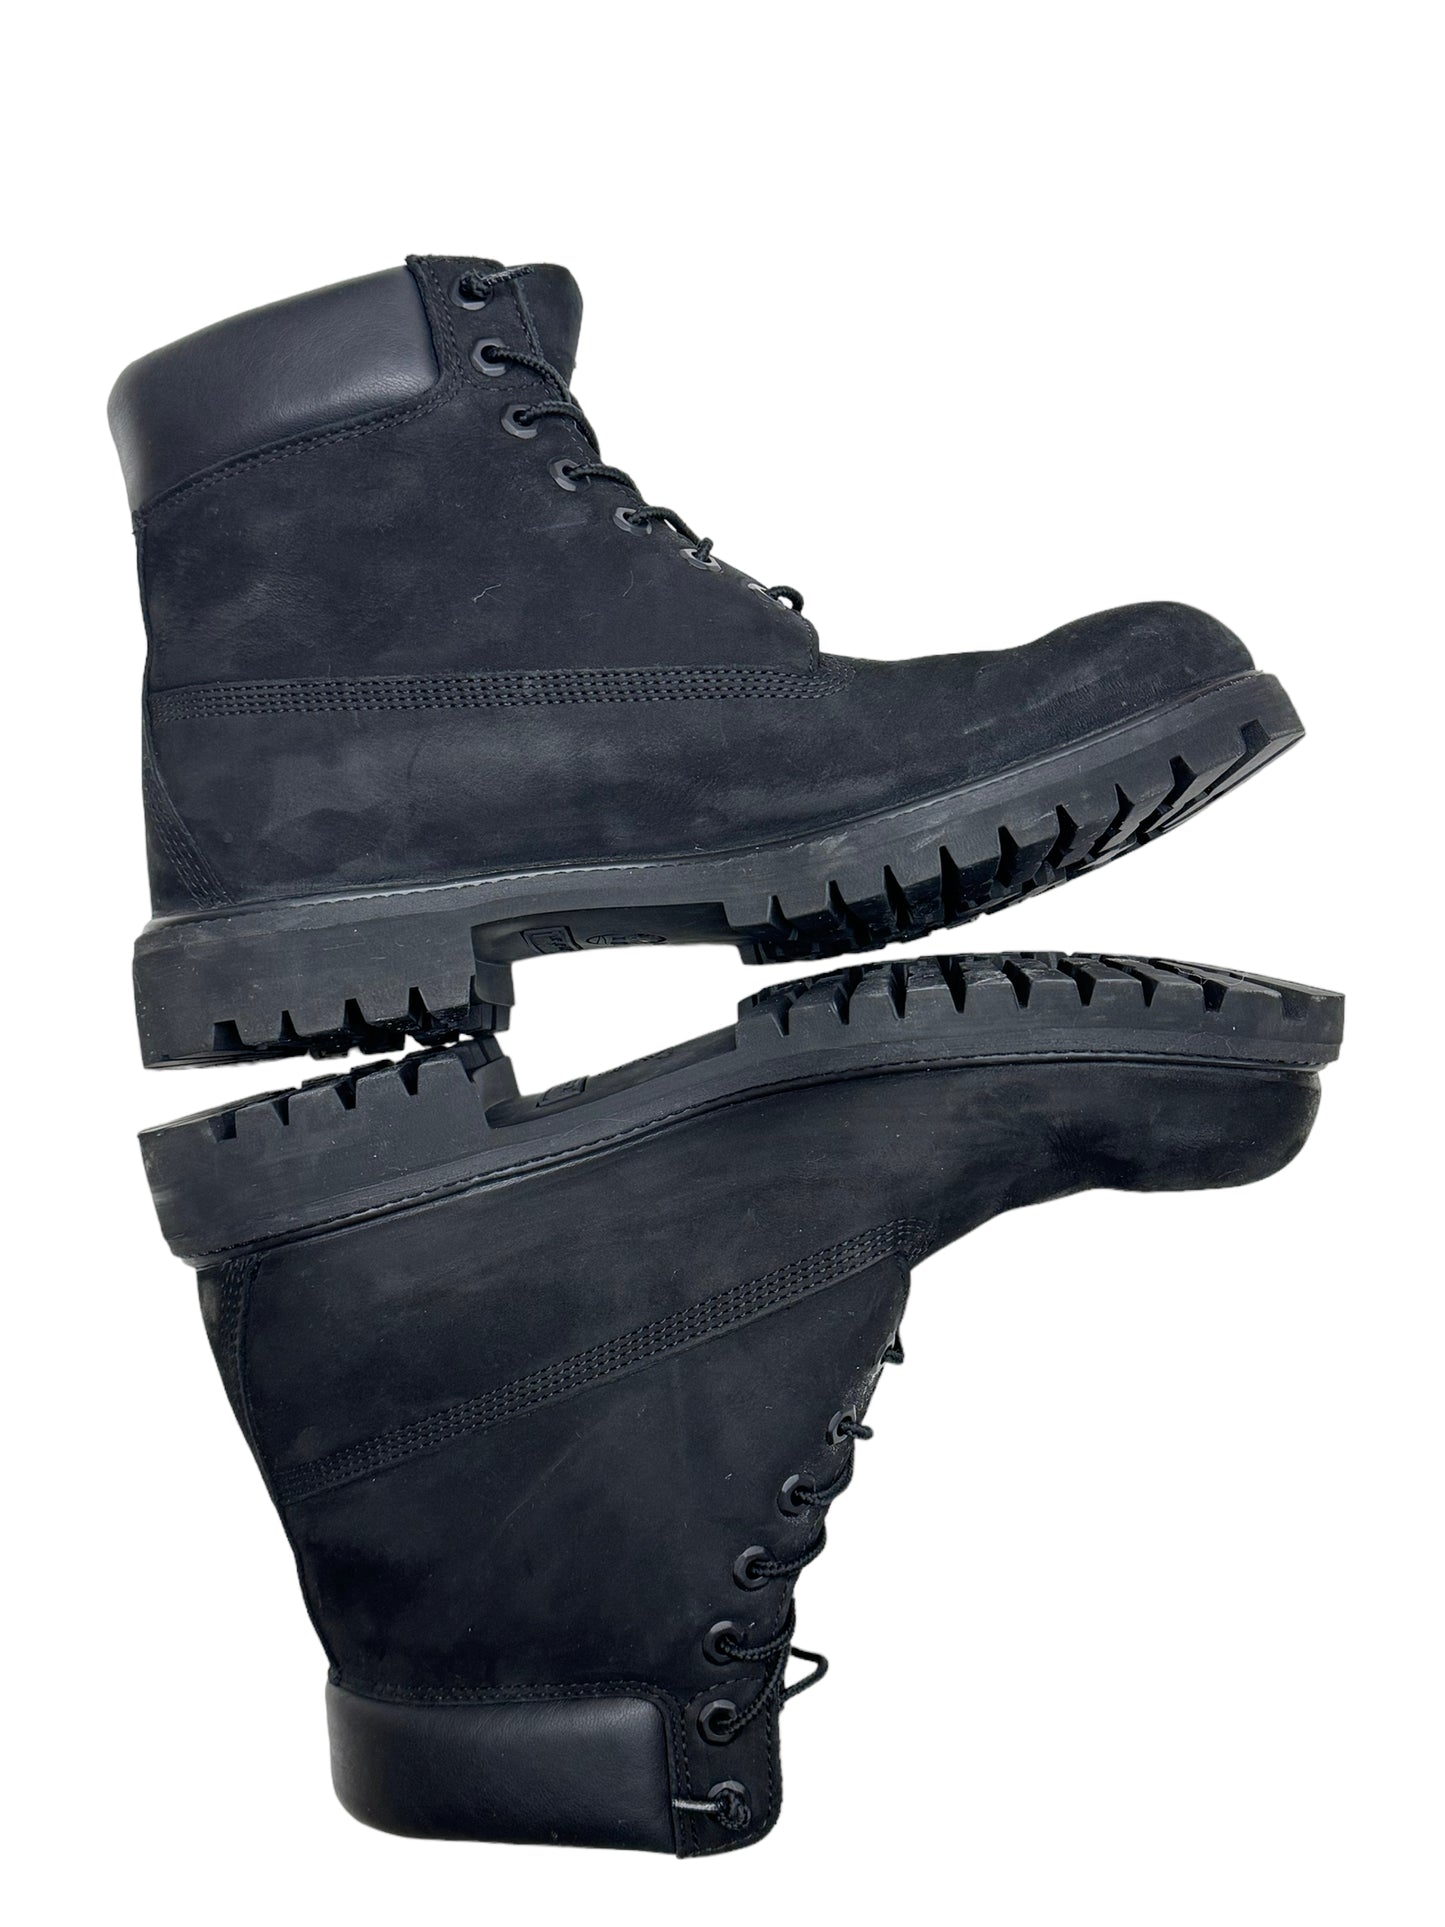 Timberland Men's Boots Black - Size 12